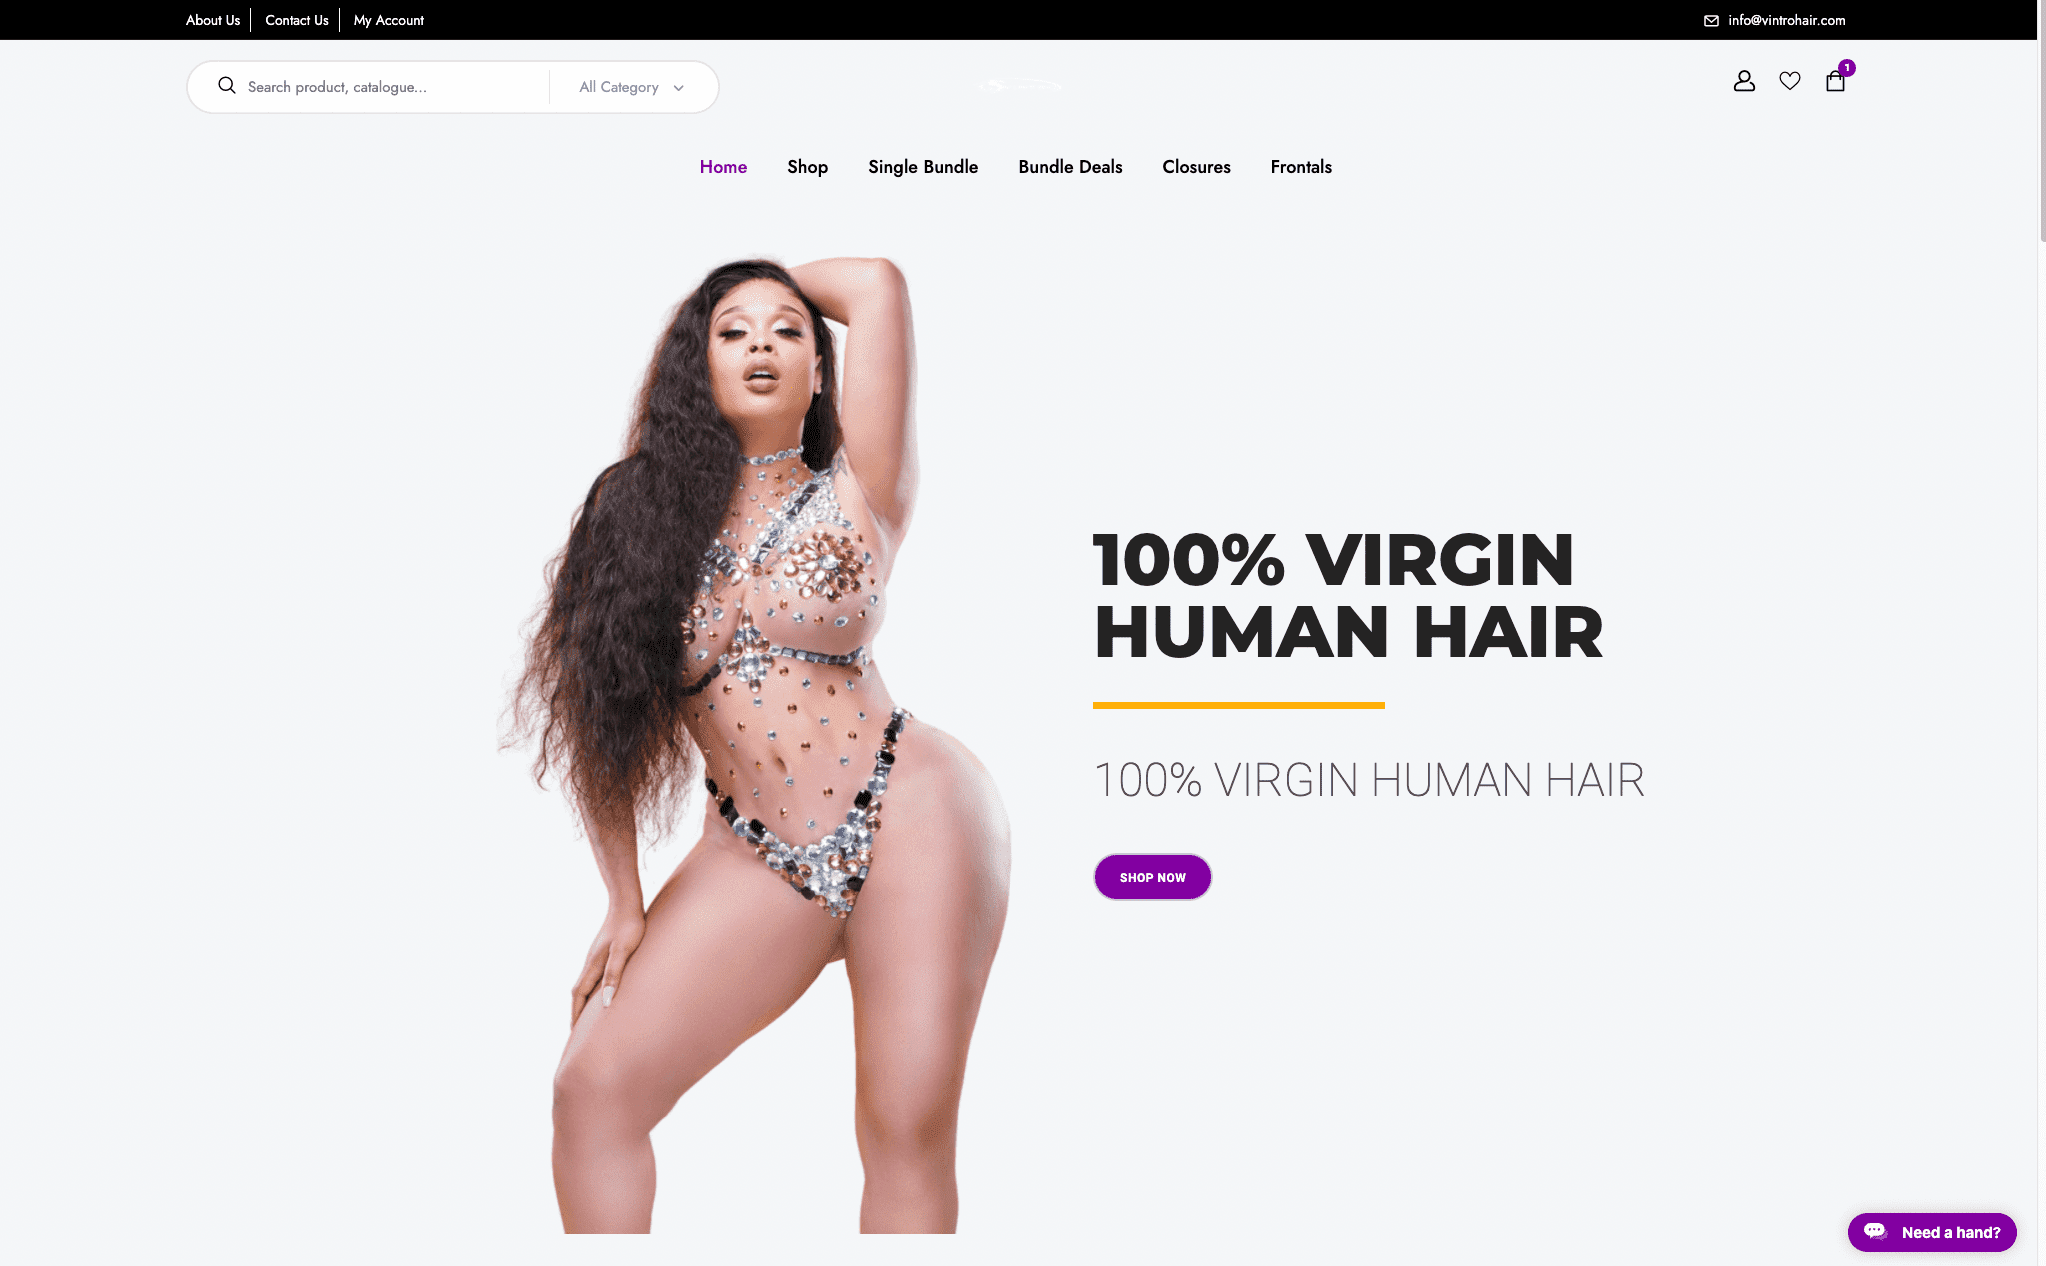 Welcome to Your Premium Hair Destination

Discover our top-quality 100% Virgin Human Hair. Explore a variety of styles with ease.

Shop Now